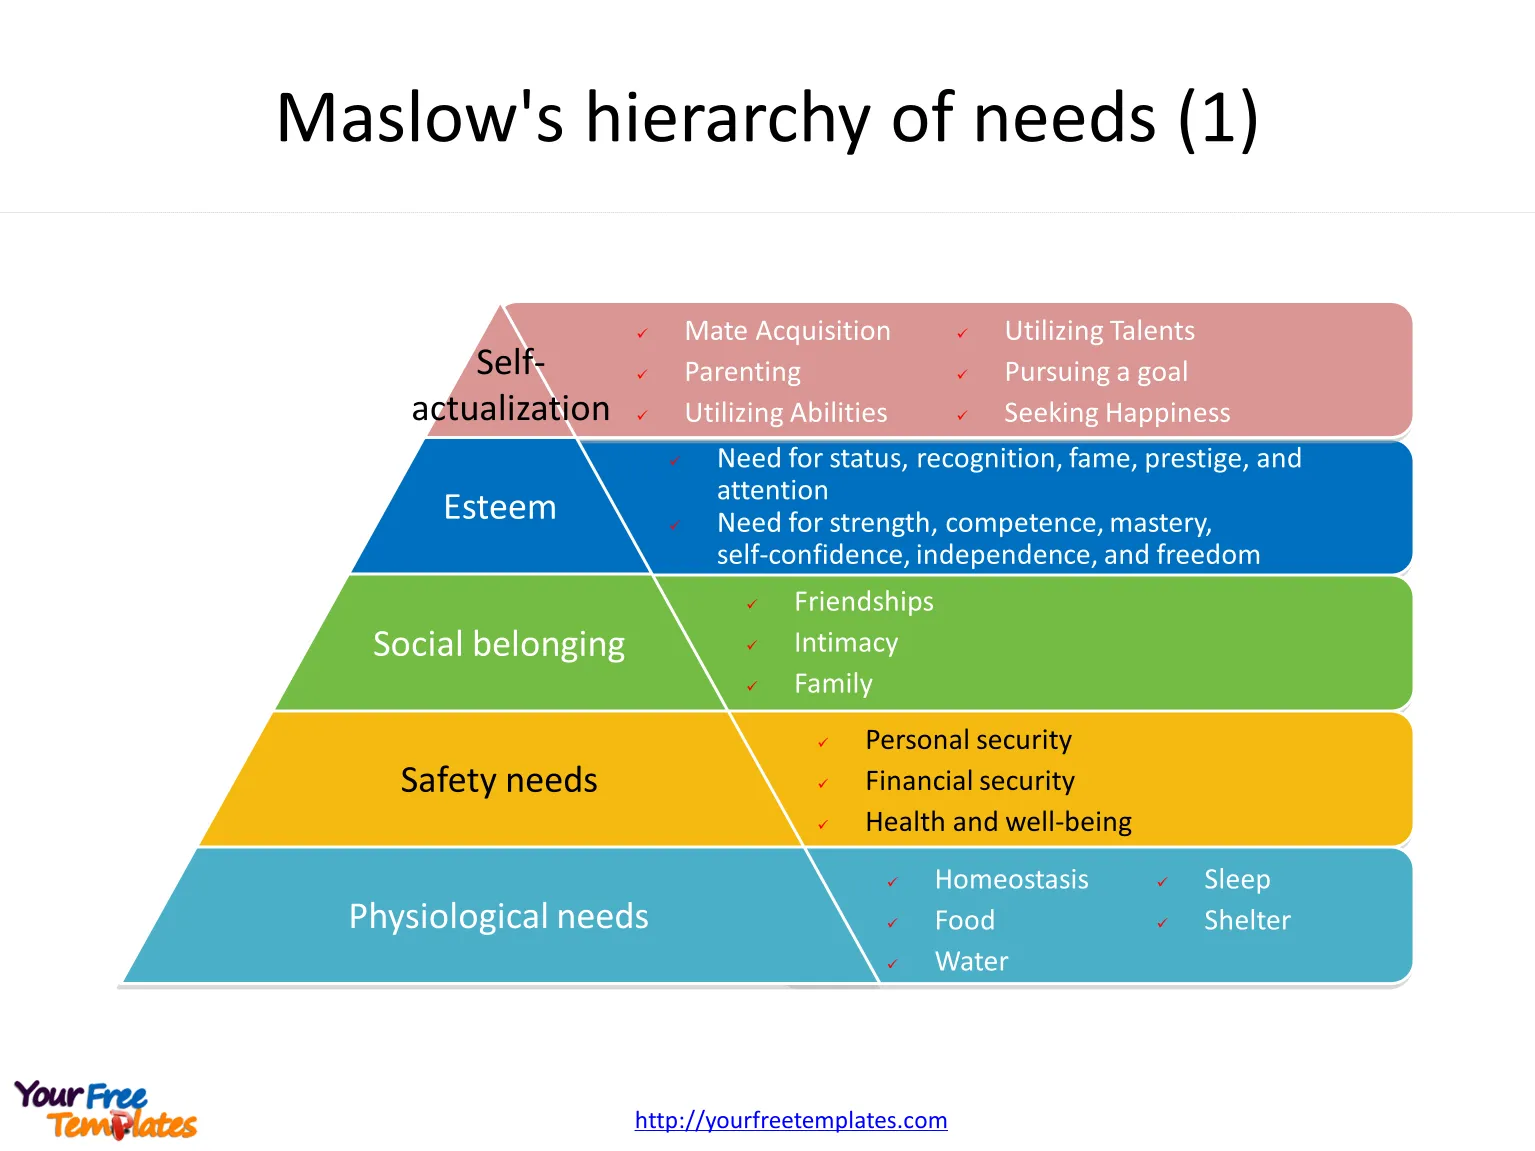 Maslow’s hierarchy of needs of five levels